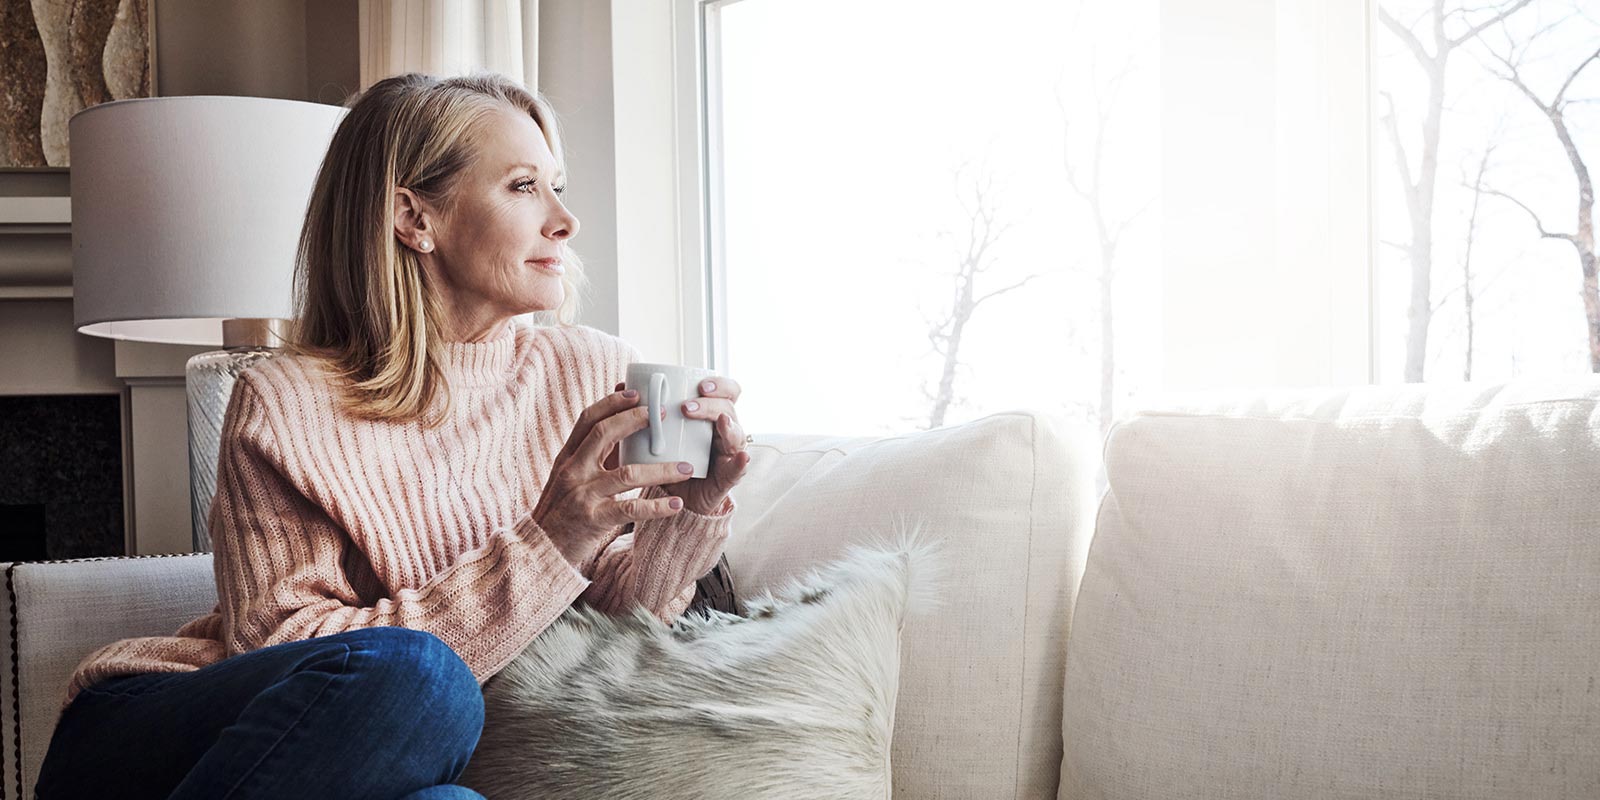 A retired woman sitting on her sofa with a coffee calmly looking at the window